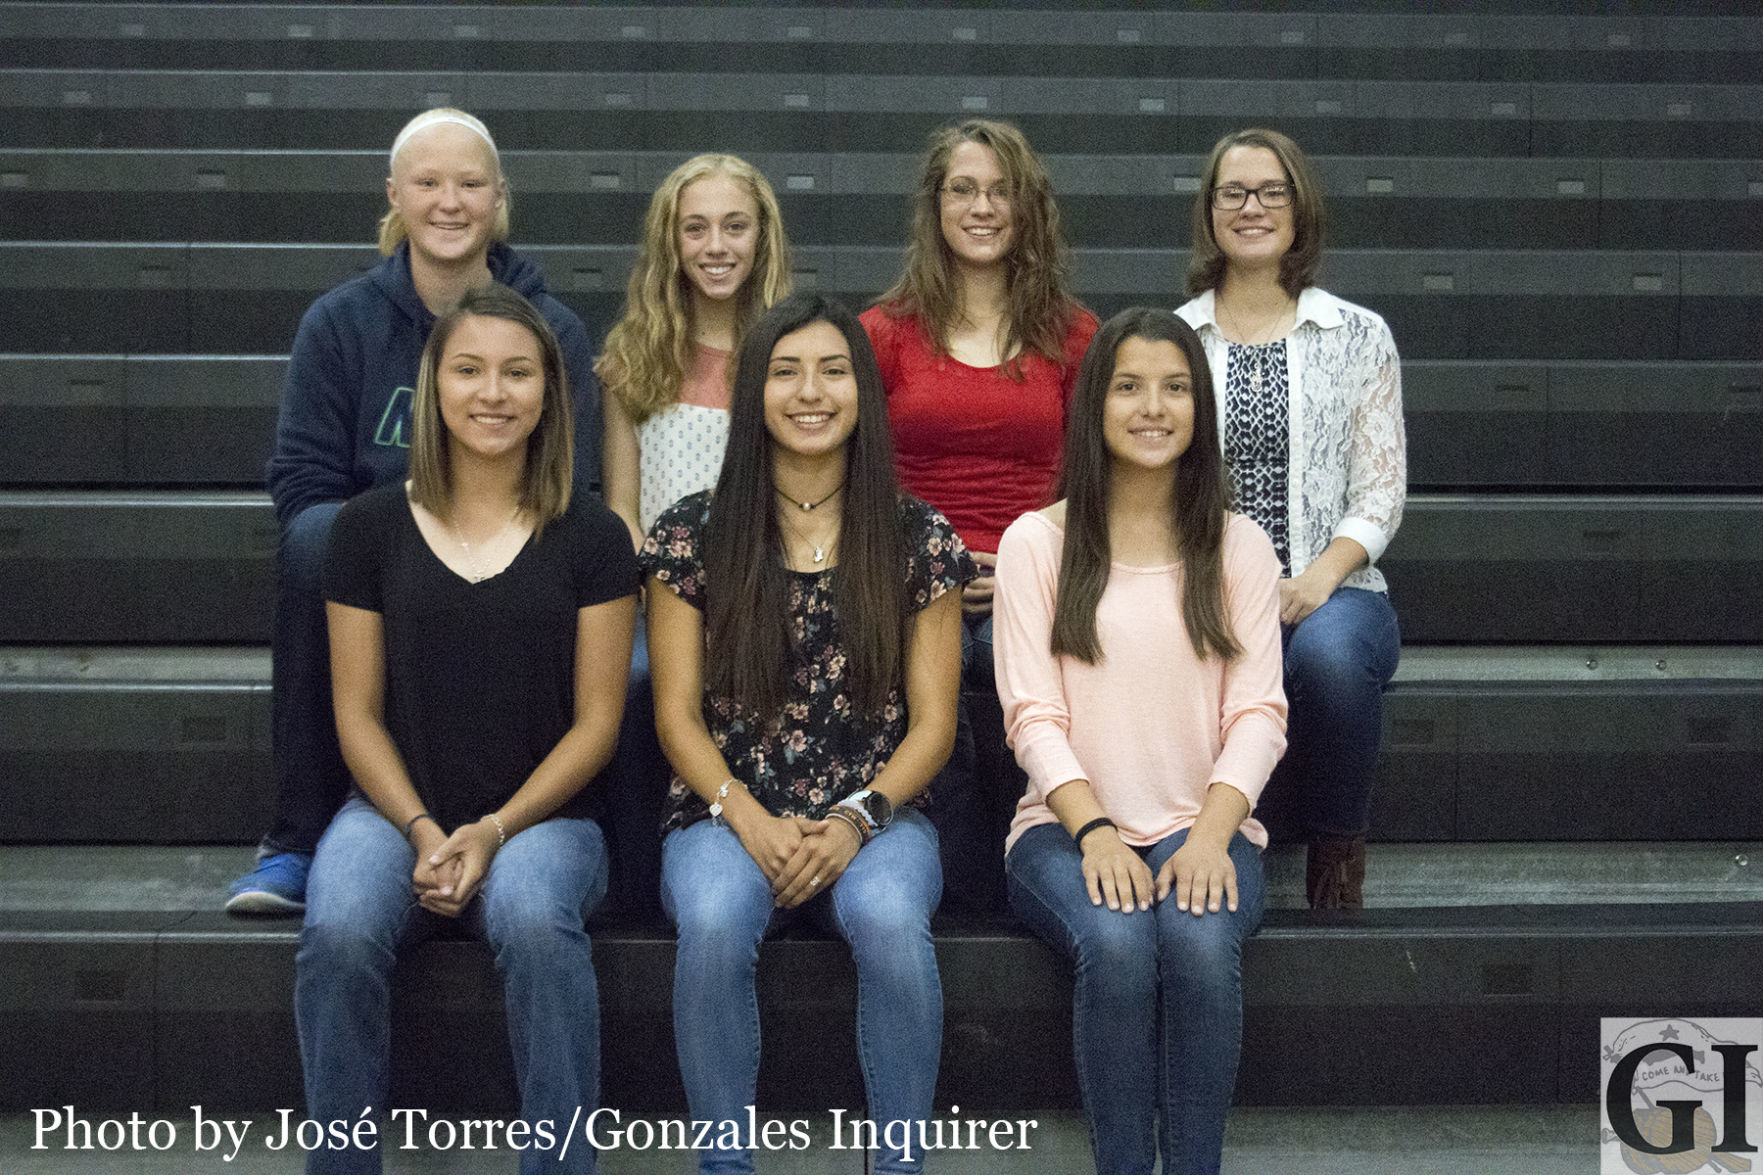 The Gonzales Lady Apaches will be competing in at least seven events at the regional meet this Friday. Pictured are the qualifiers for that meet.